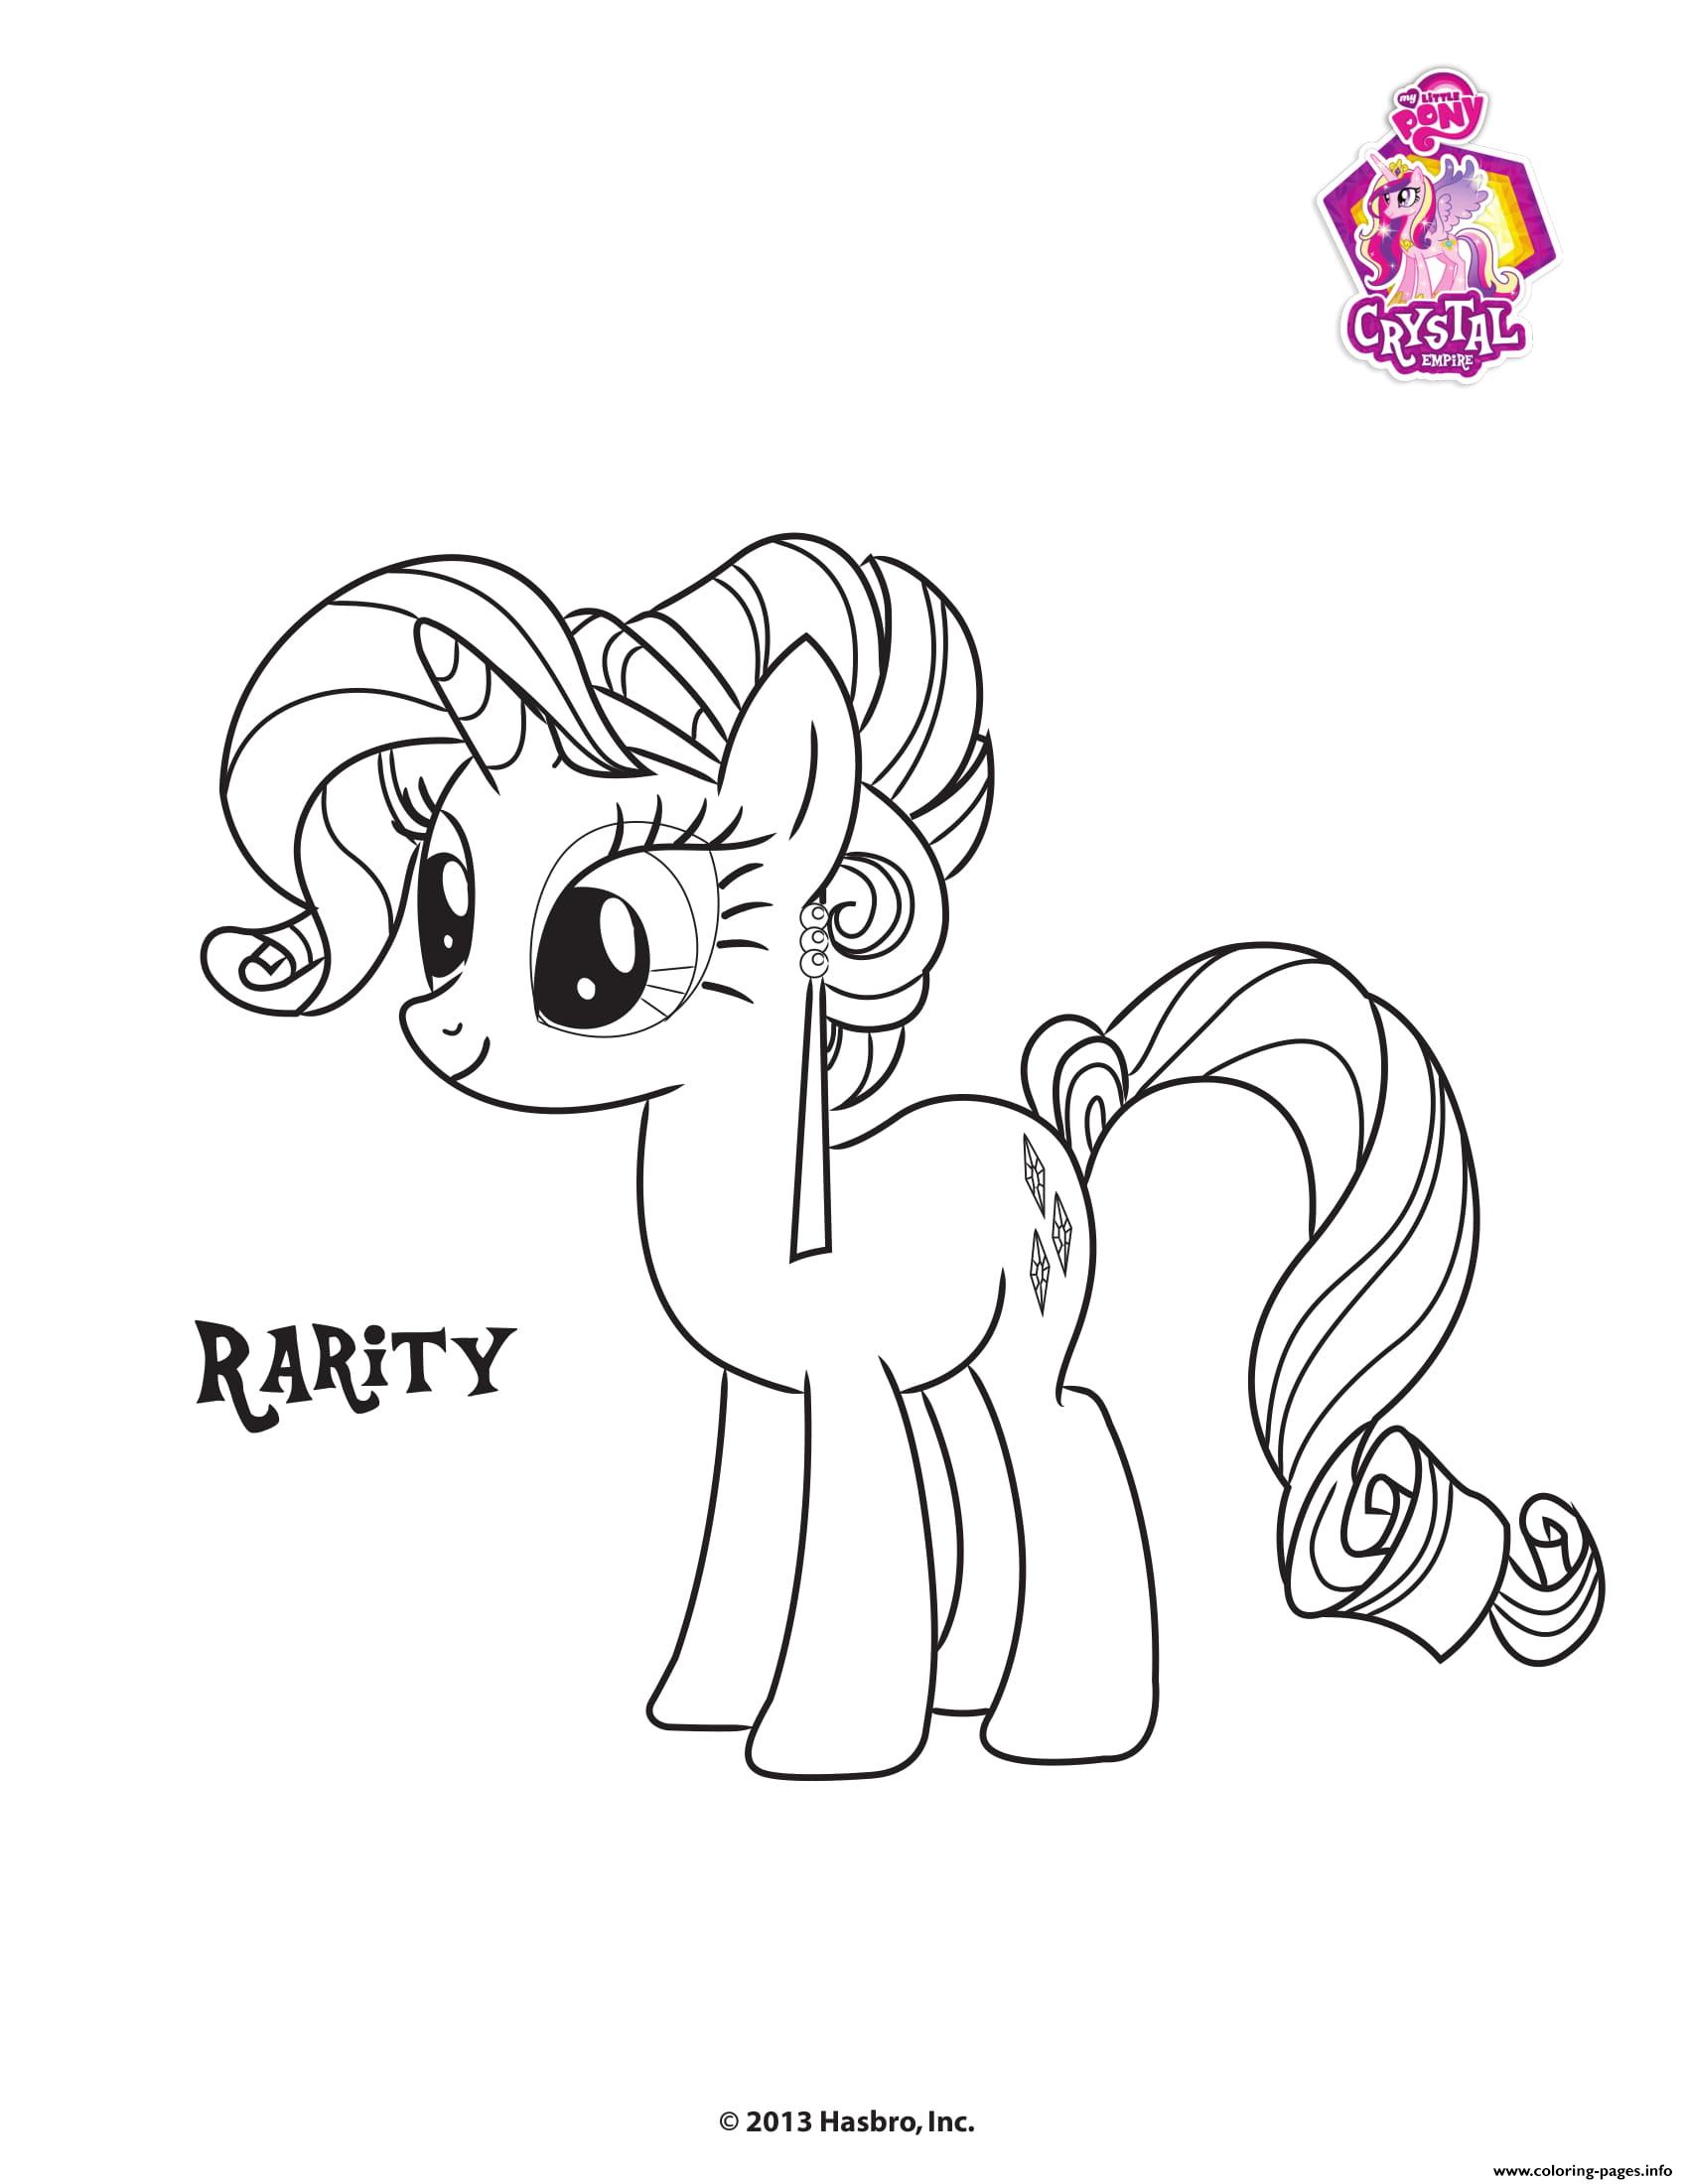 Rarity Crystal Empire My Little Pony Coloring Pages Printable In coloringcrew.com find hundreds of coloring pages of my little pony and online coloring pages for free. rarity crystal empire my little pony